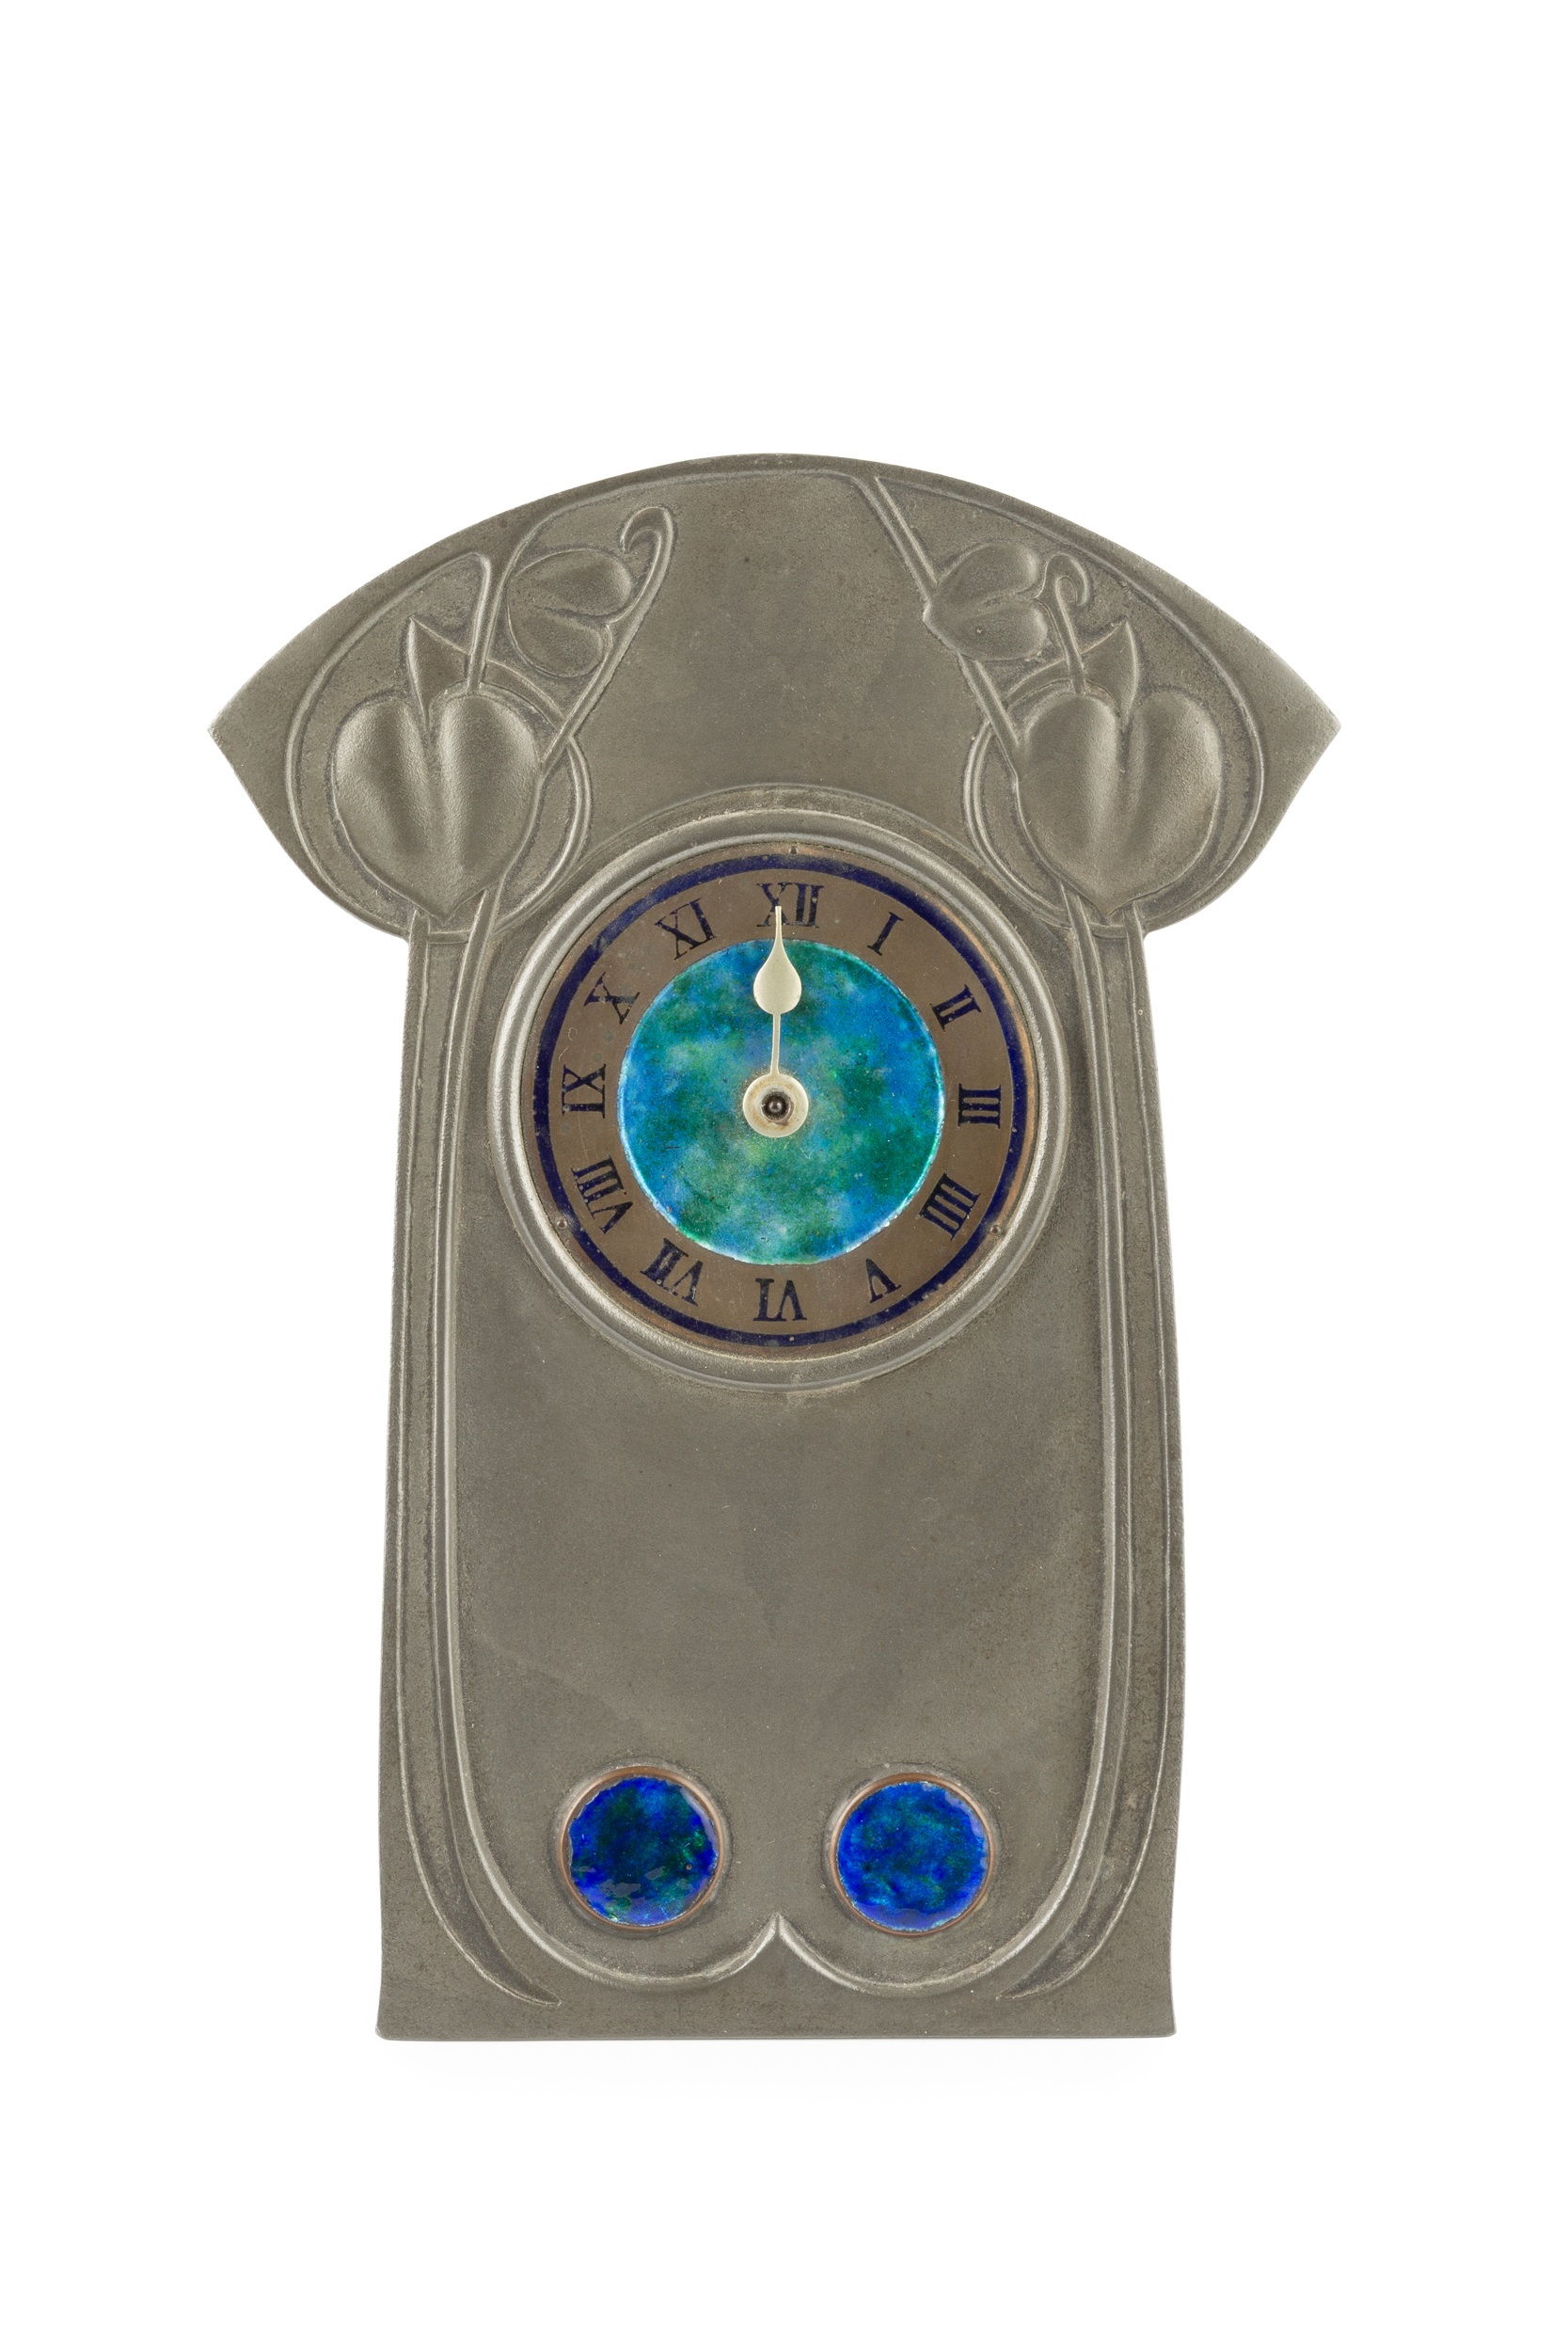 Archibald Knox (1864-1933) for Liberty & Co. Tudric mantle clock, circa 1905 pewter, enamel, and - Image 3 of 3